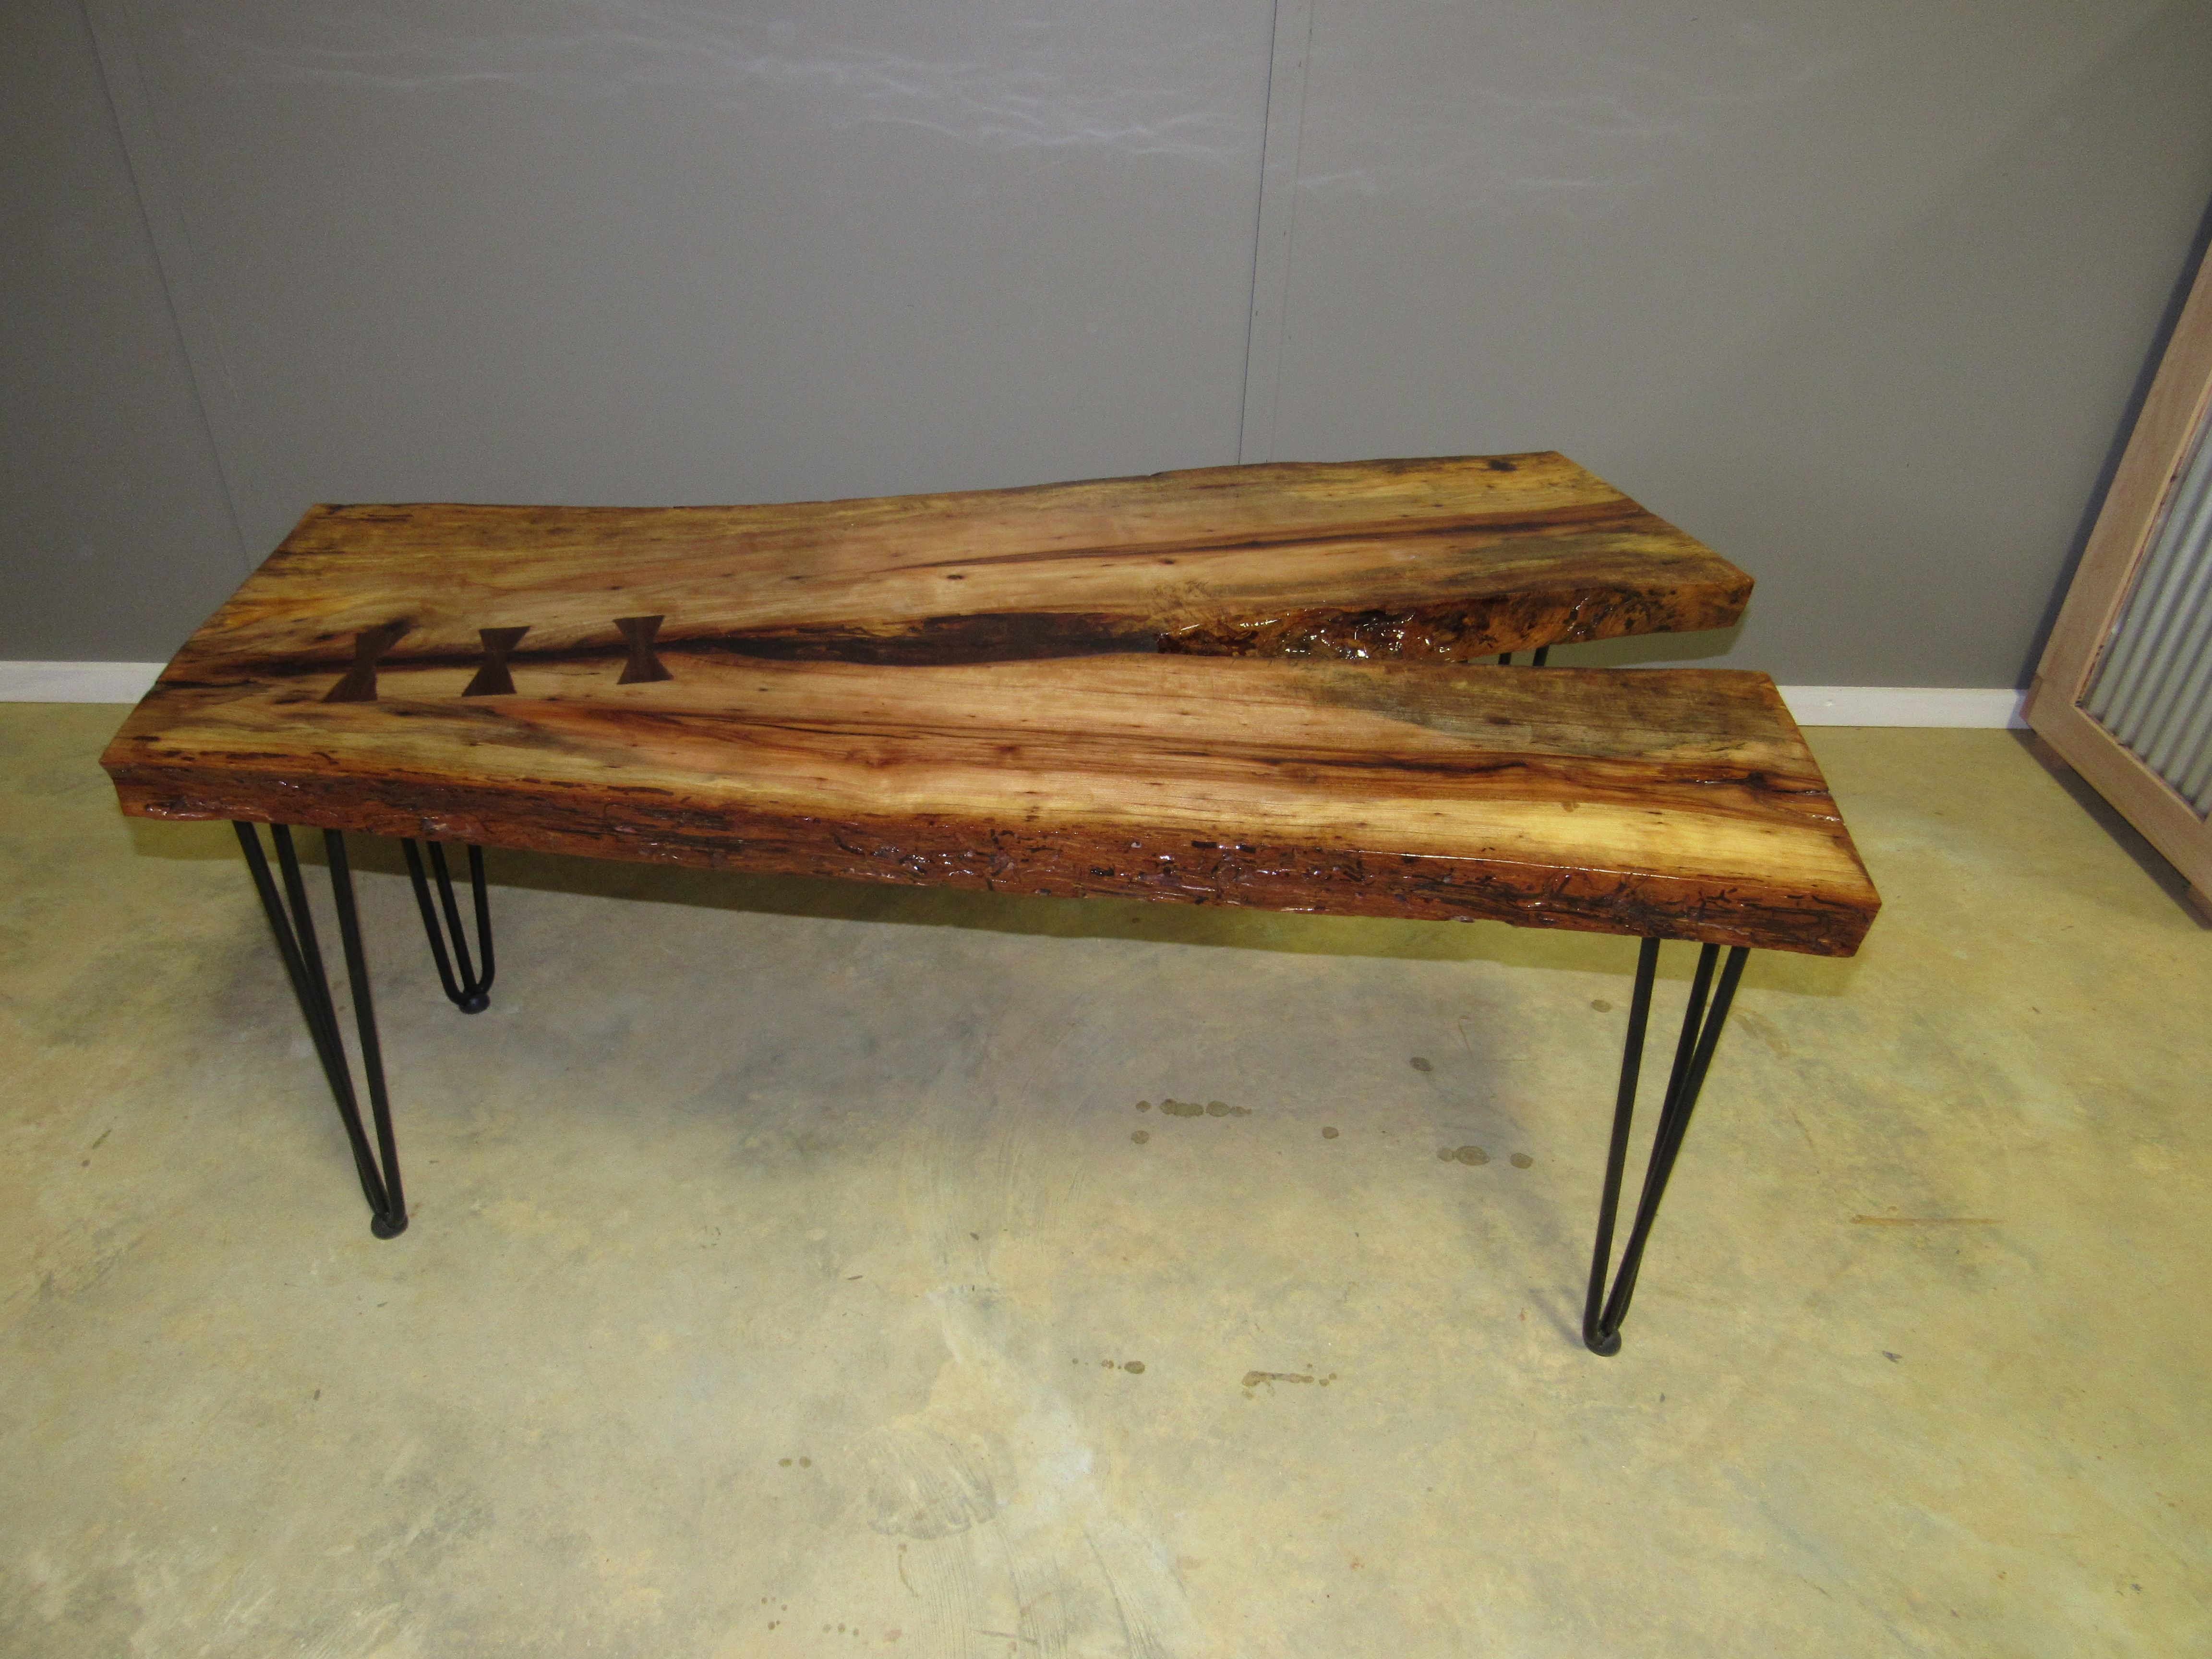 Buy A Hand Made Live Edge Pecan Slab Coffee Table Made To Order